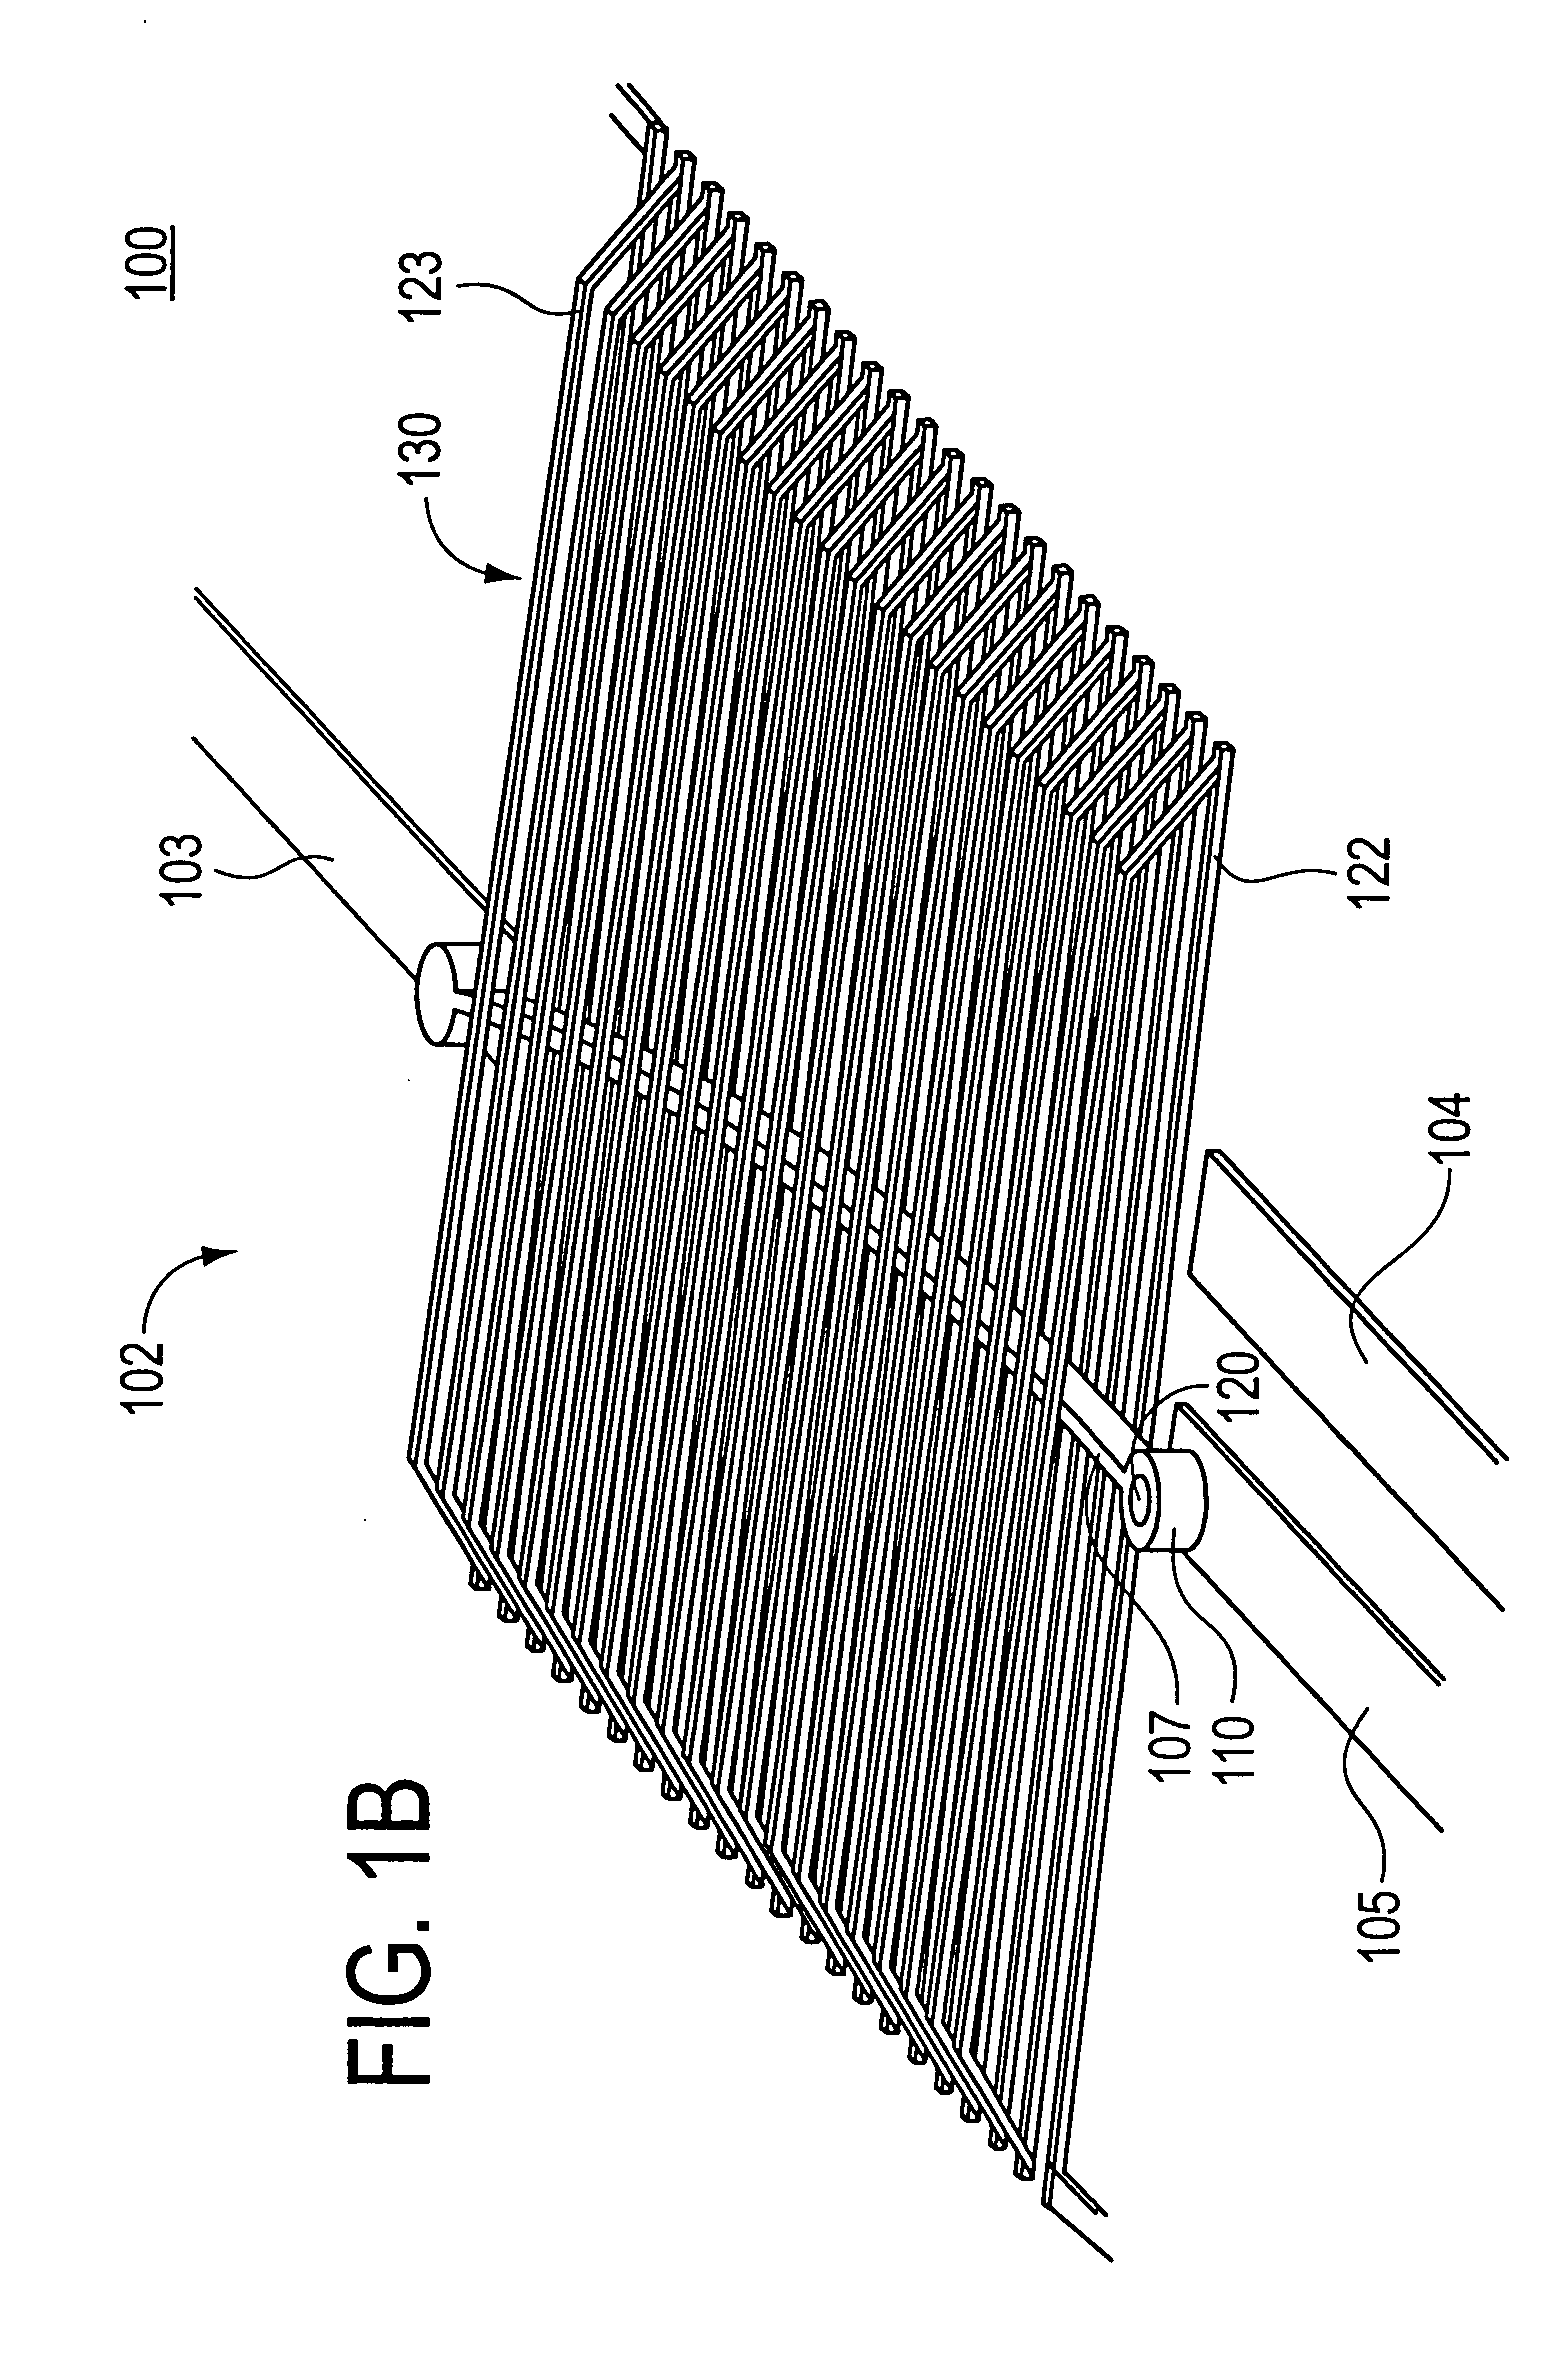 Liquid metal contact reed relay with integrated electromagnetic actuator